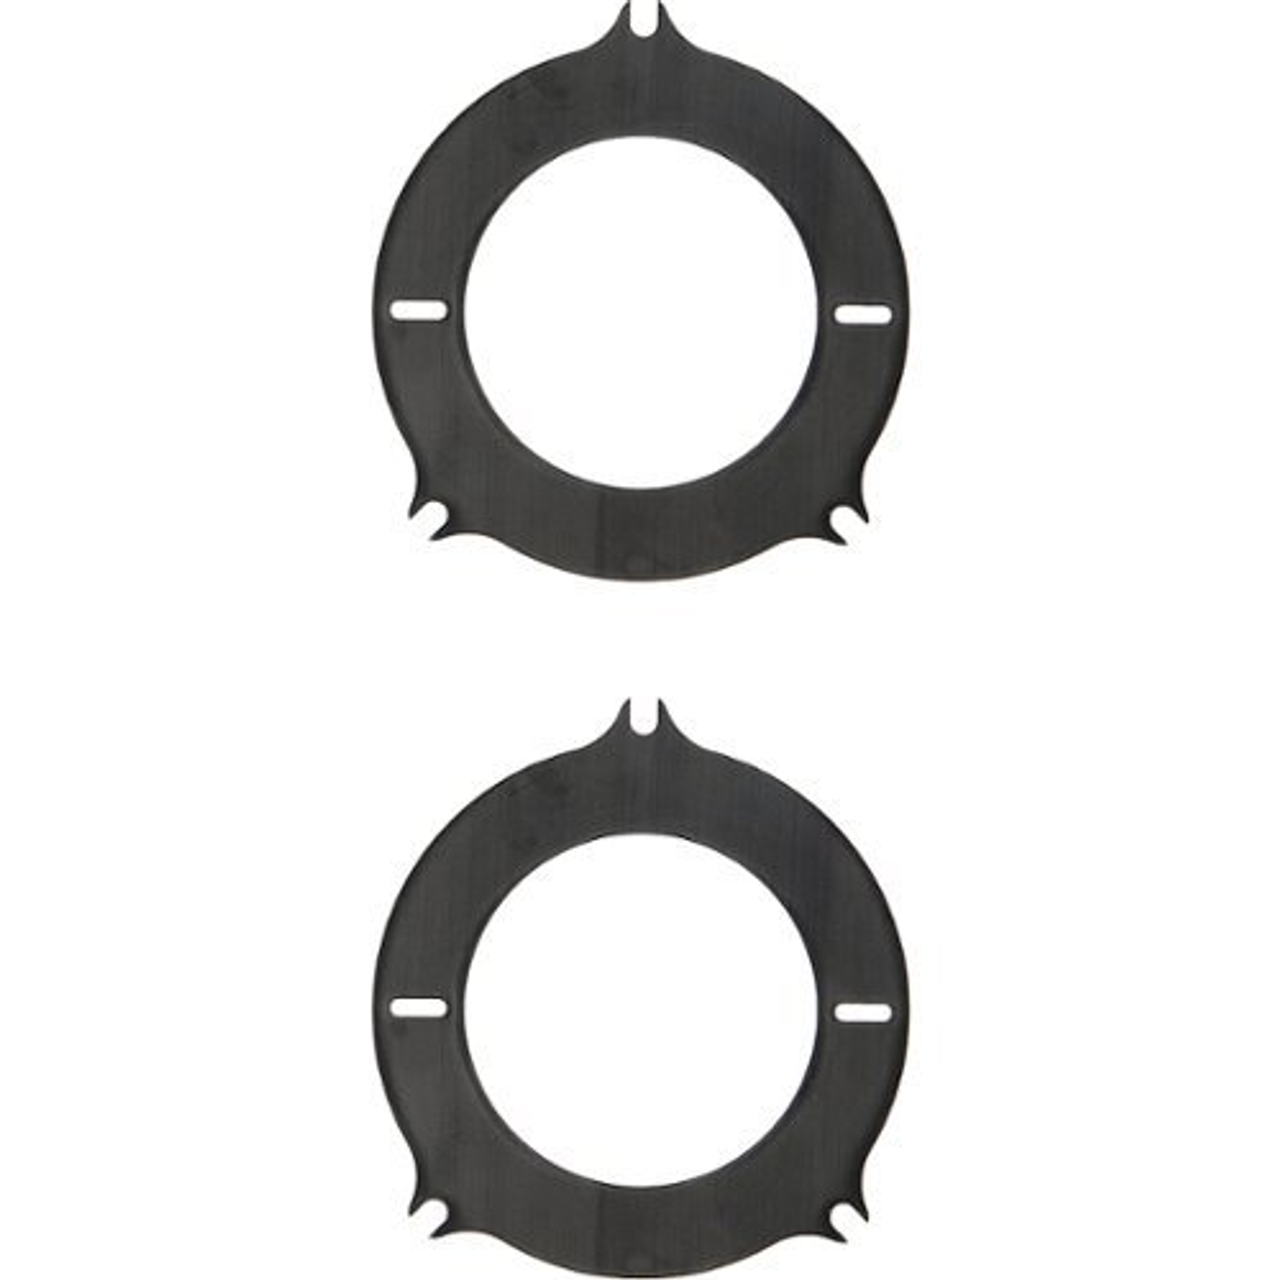 Metra - Speaker Adapter Plates for Most 2006-Up BMW and Mini Vehicles (2-Pack) - Black